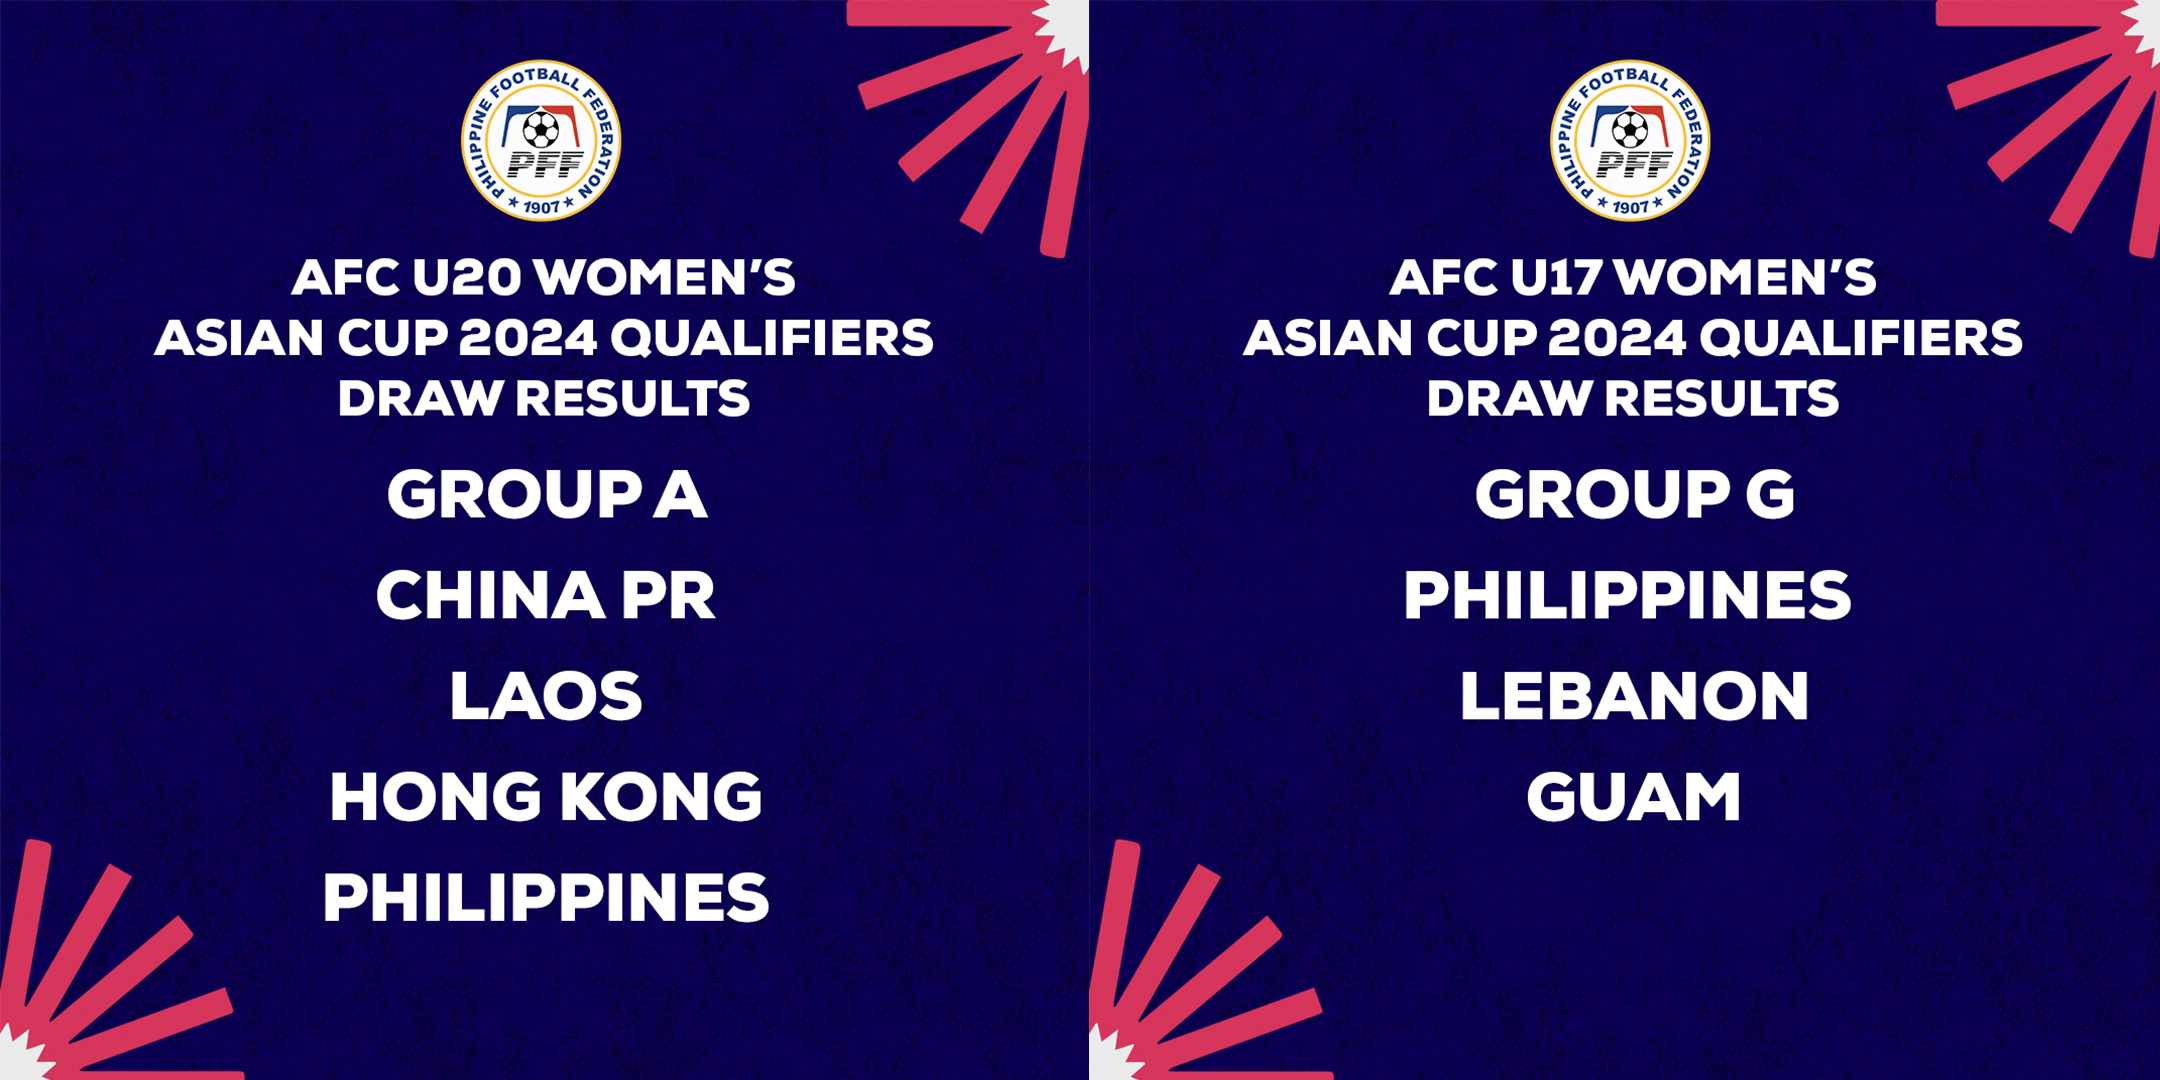 PHI U20 and U17 Women’s Teams groups decided in AFC U20 Women’s and AFC